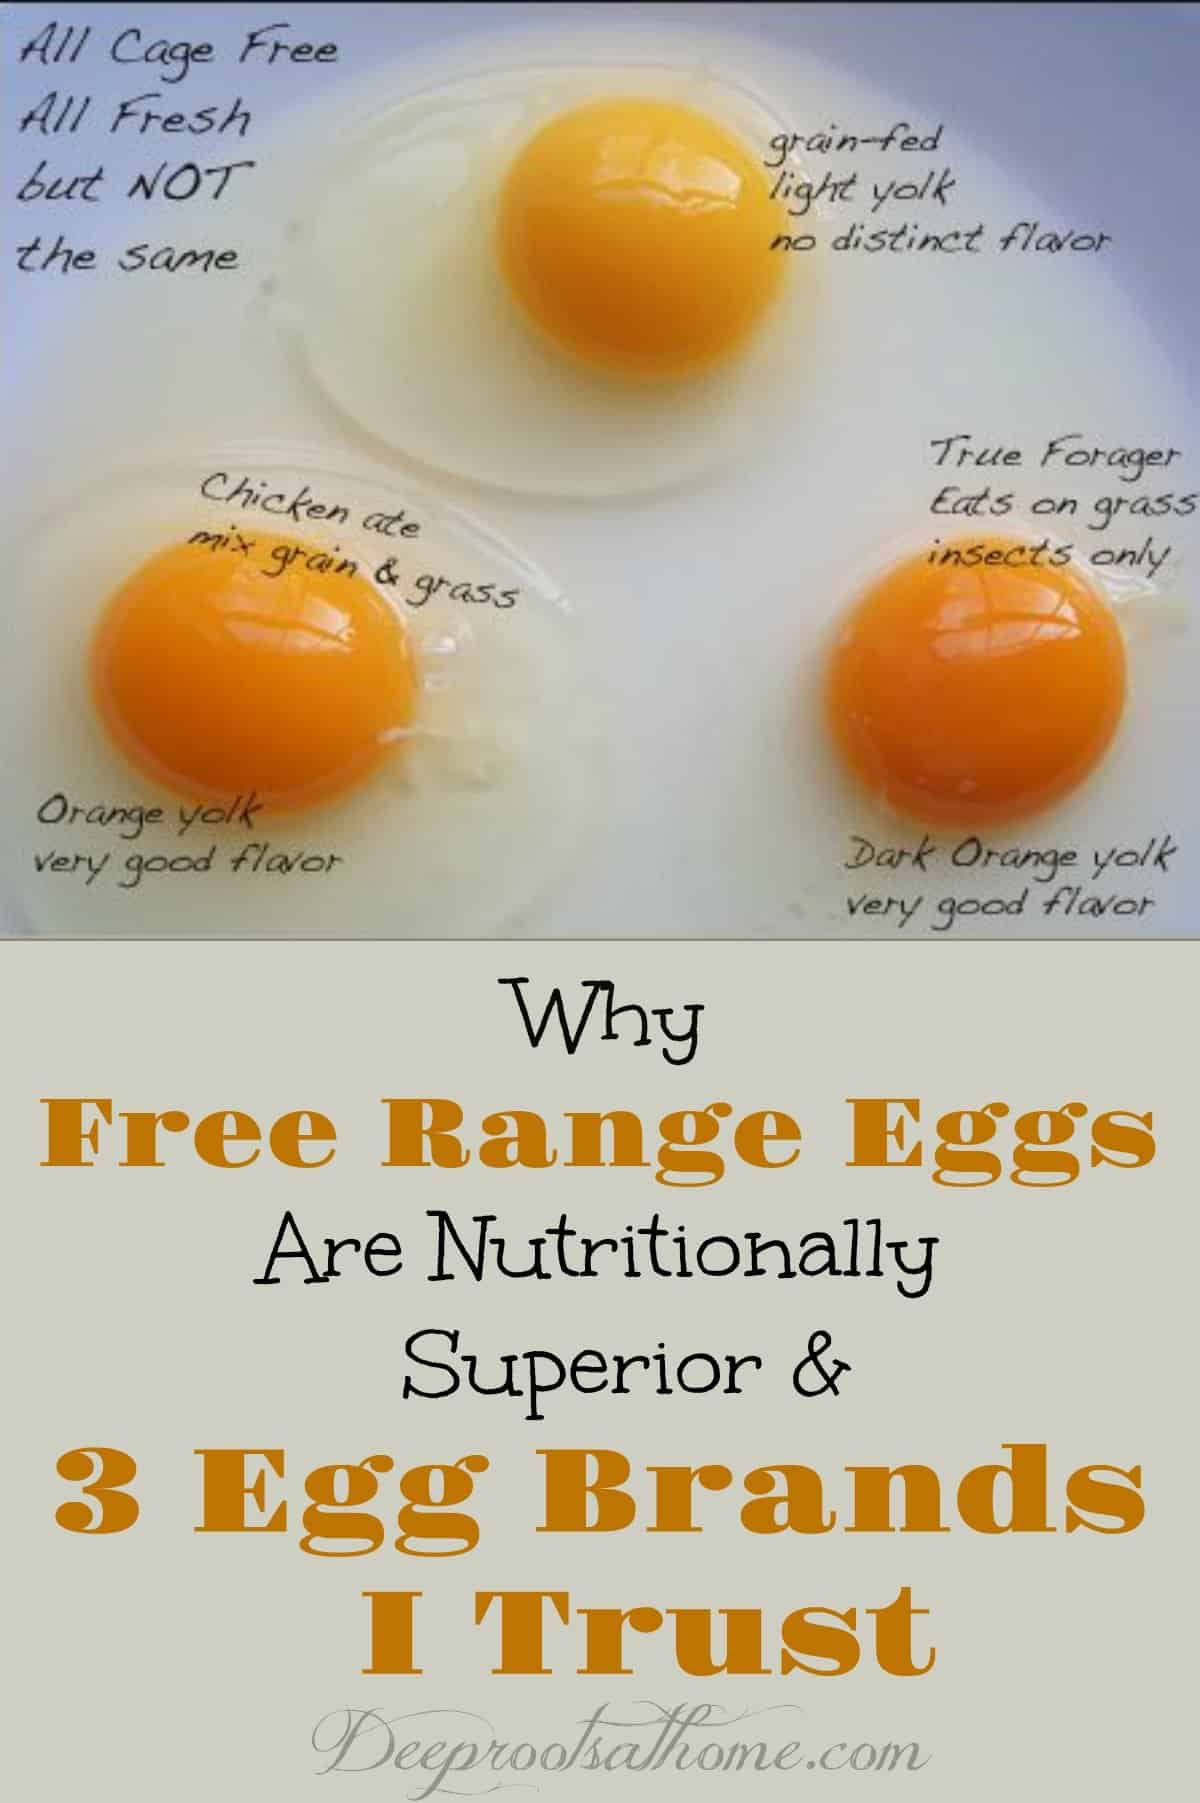 Why Free Range Eggs Are Nutritionally Superior & 3 Egg Brands I Trust. Comparing egg companies and superiority of eggs